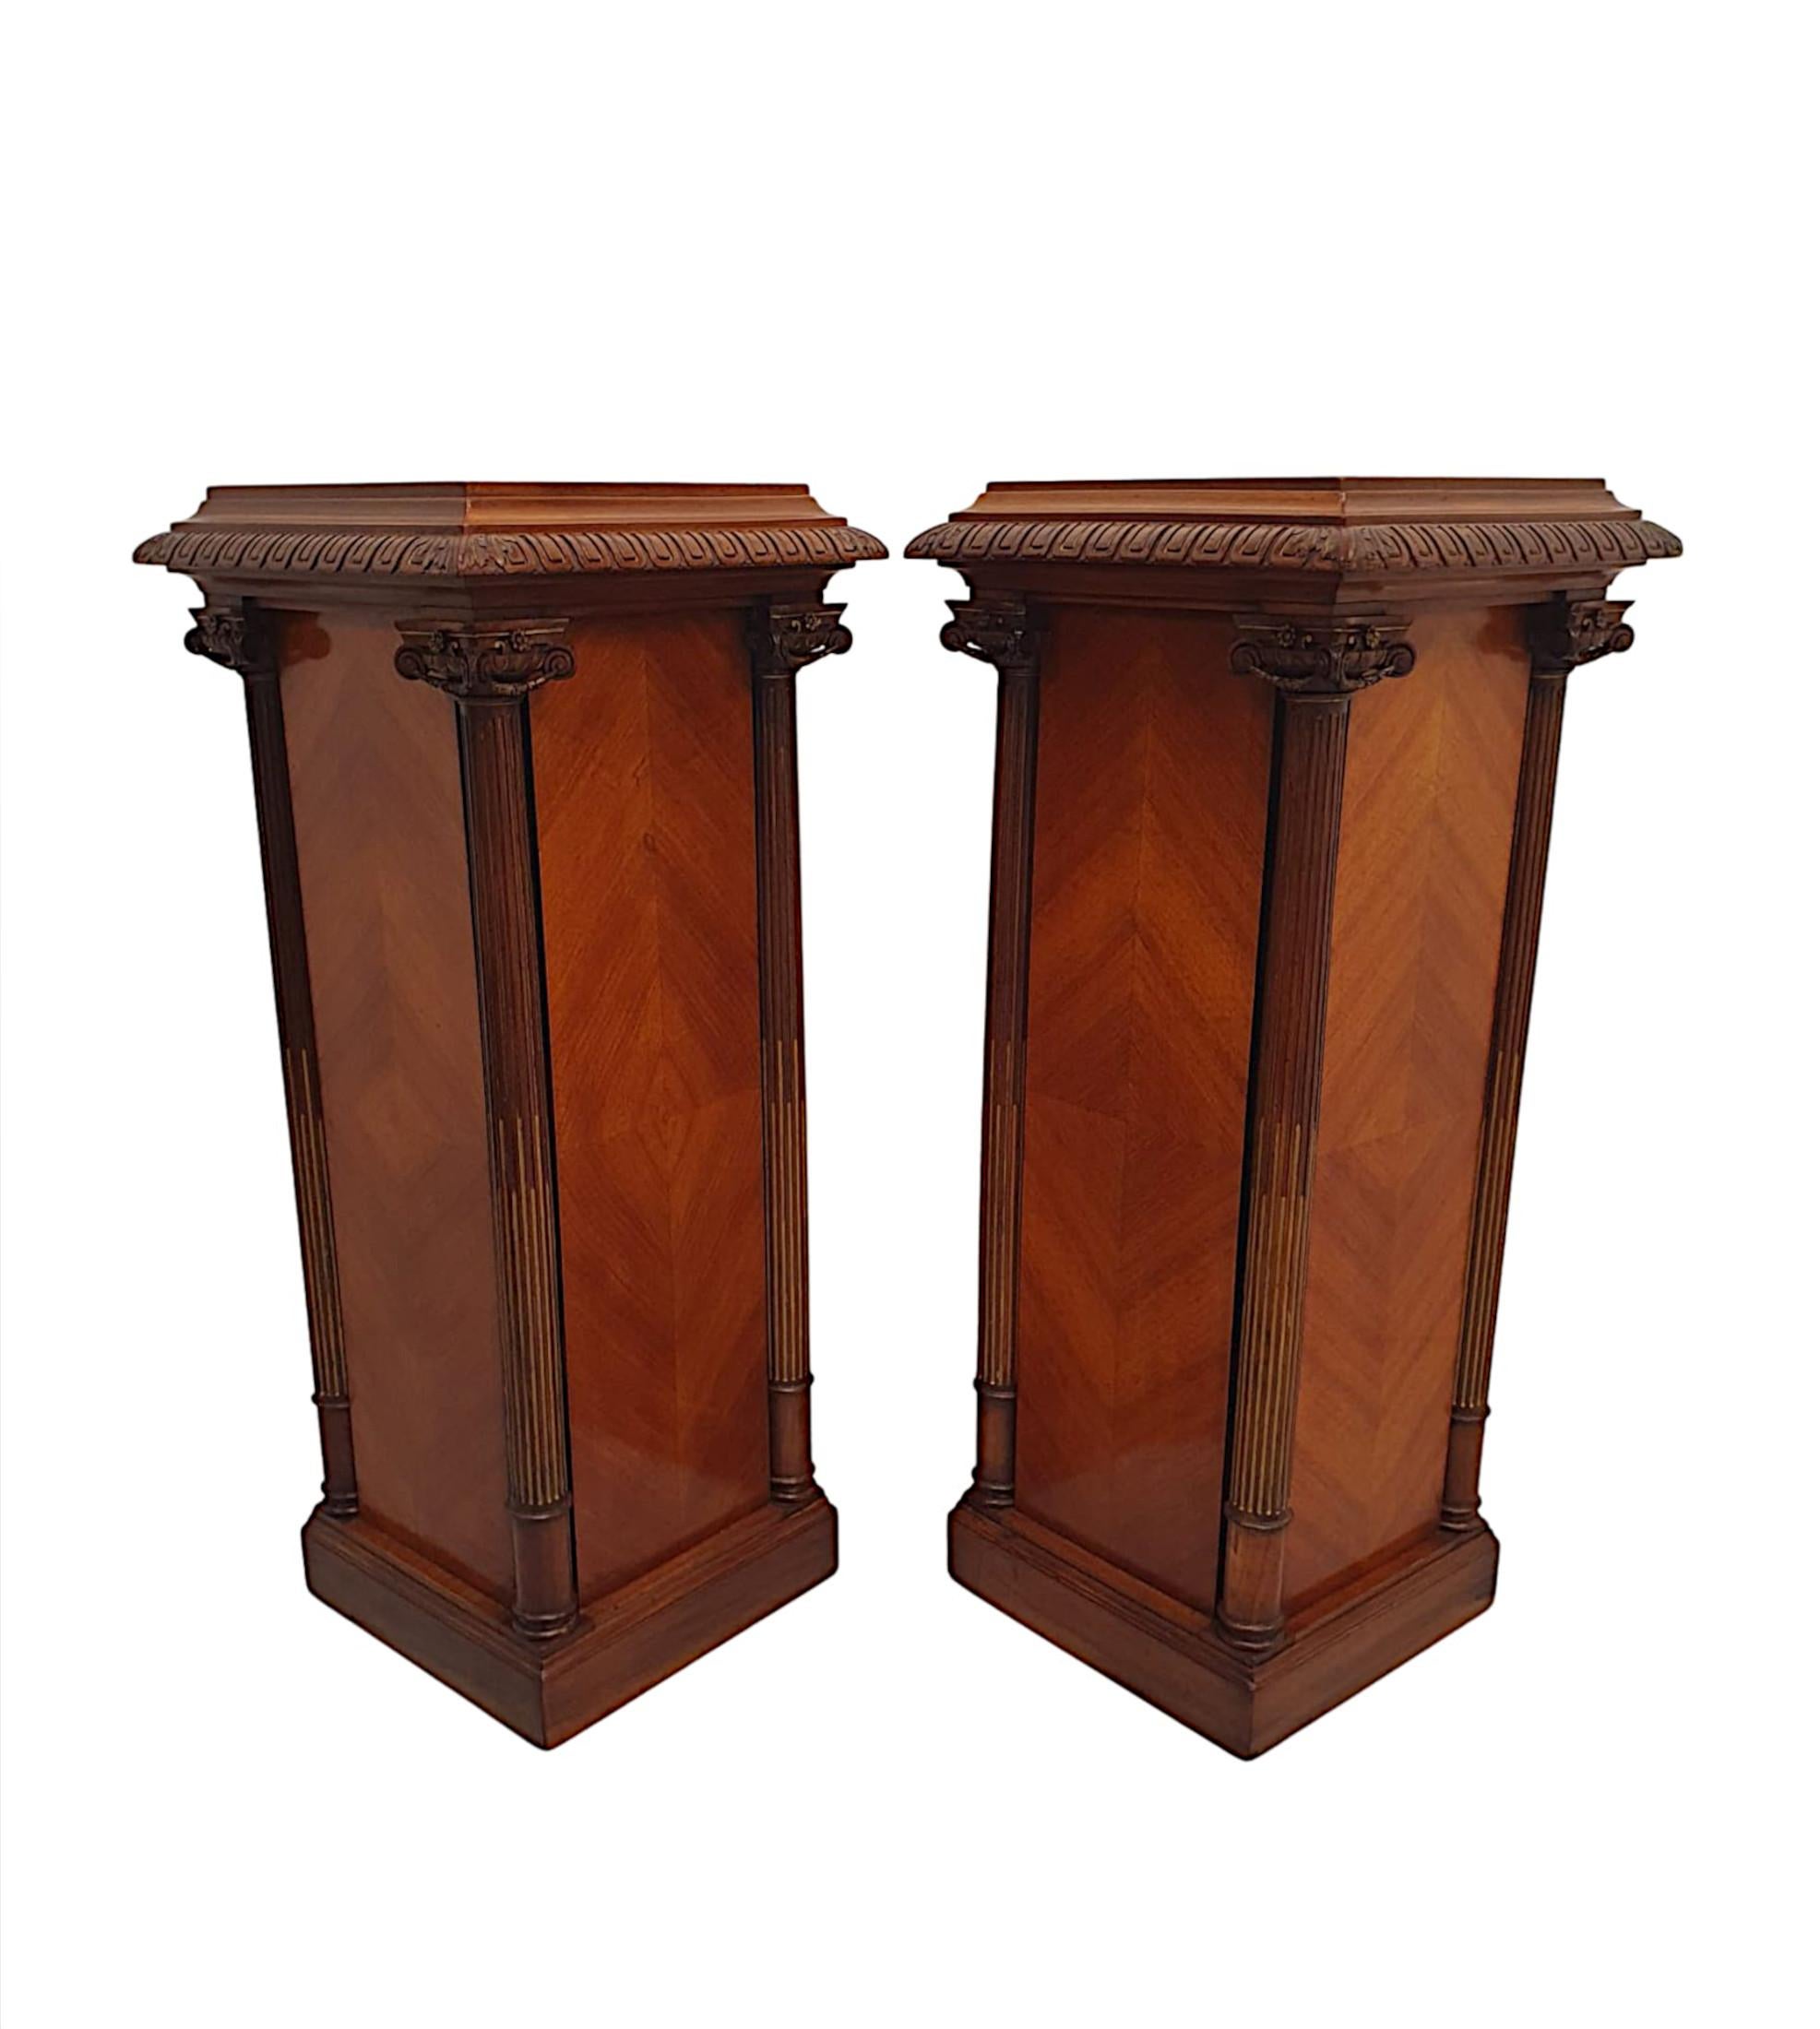 A very rare and fine pair of 19th Century kingwood and walnut bust or plant stands, of exceptional quality and fabulously hand carved with quarter veneered detail and beautifully rich patination and grain throughout.  The well figured, moulded top